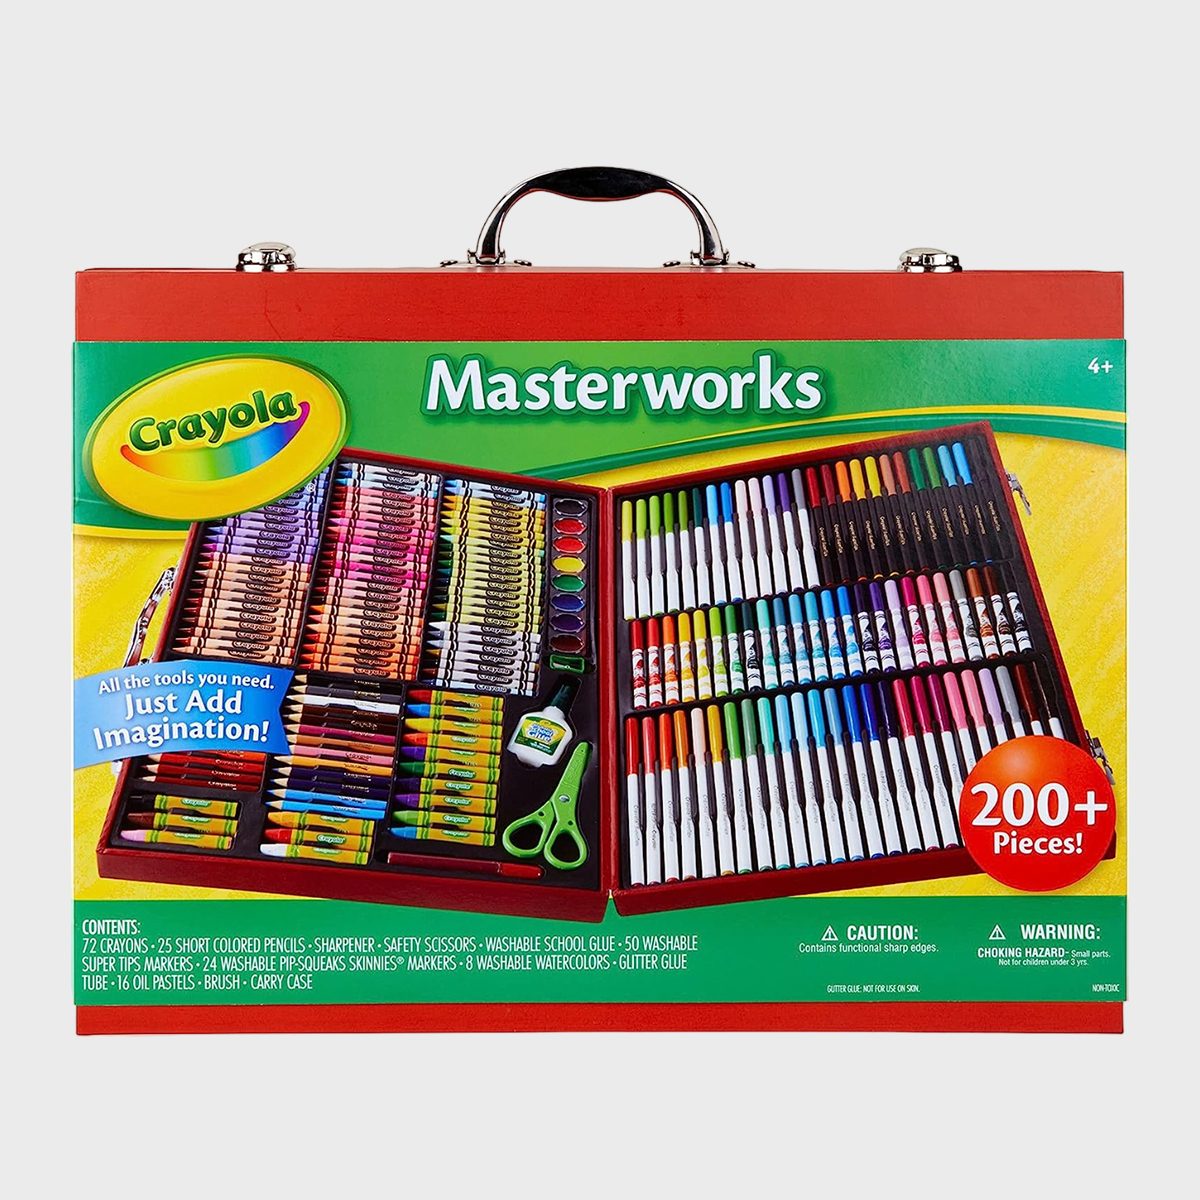 Crayola Super Tips Washable Markers, School Supplies, Stocking Stuffers, 50  Colors, Child 